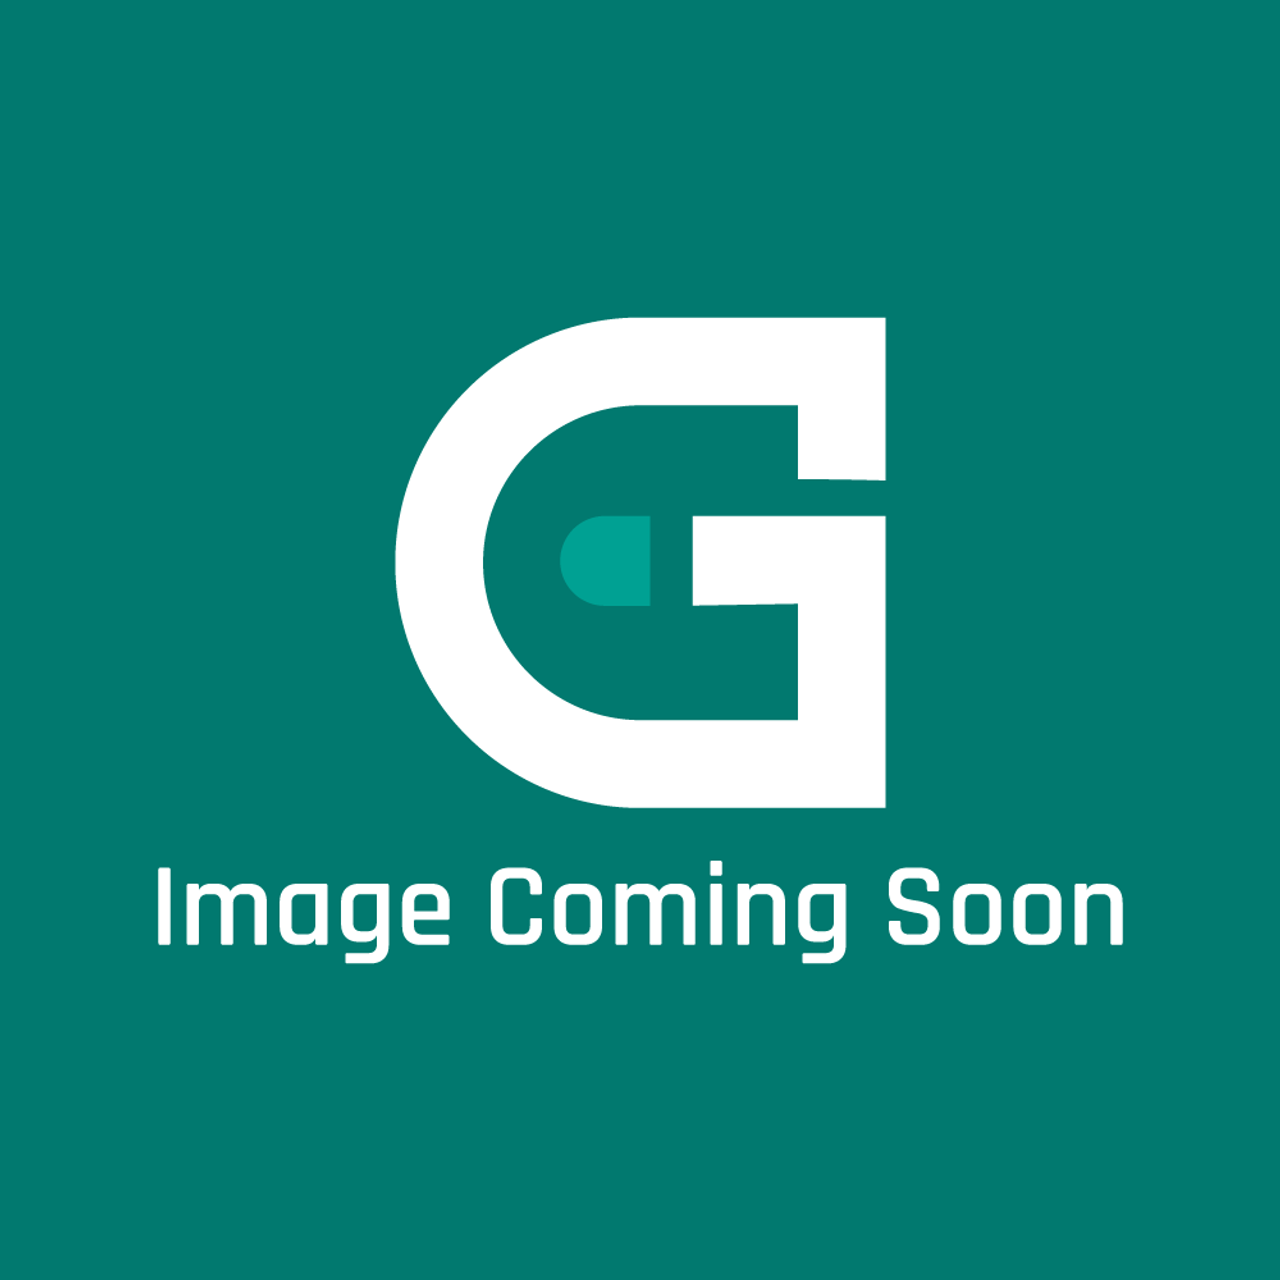 Frigidaire - Electrolux 240570242 Label-Module Cover - Image Coming Soon!